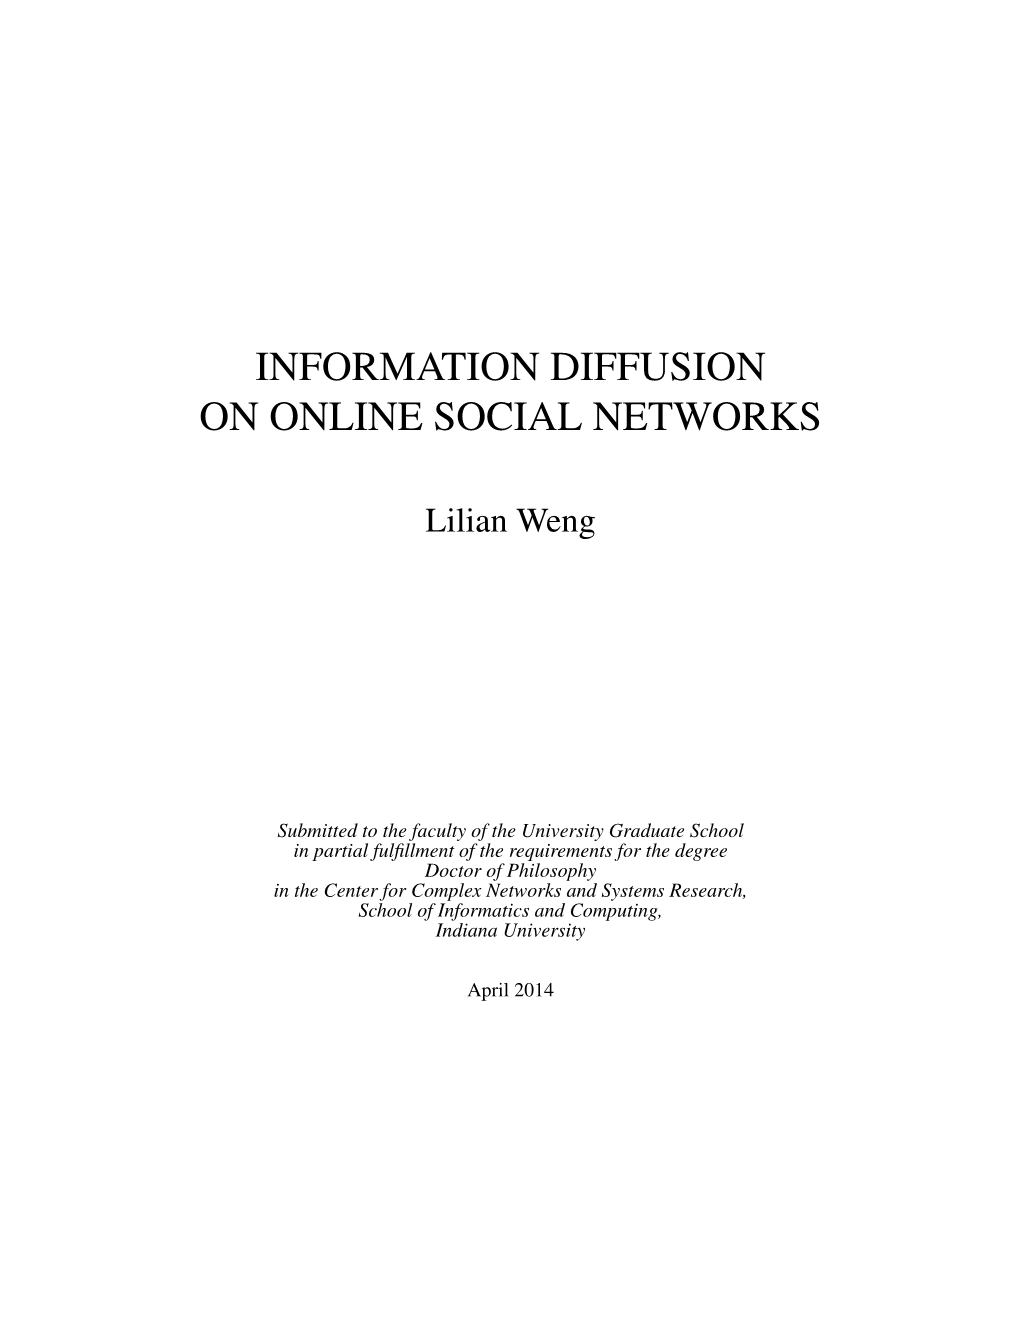 Information Diffusion on Online Social Networks